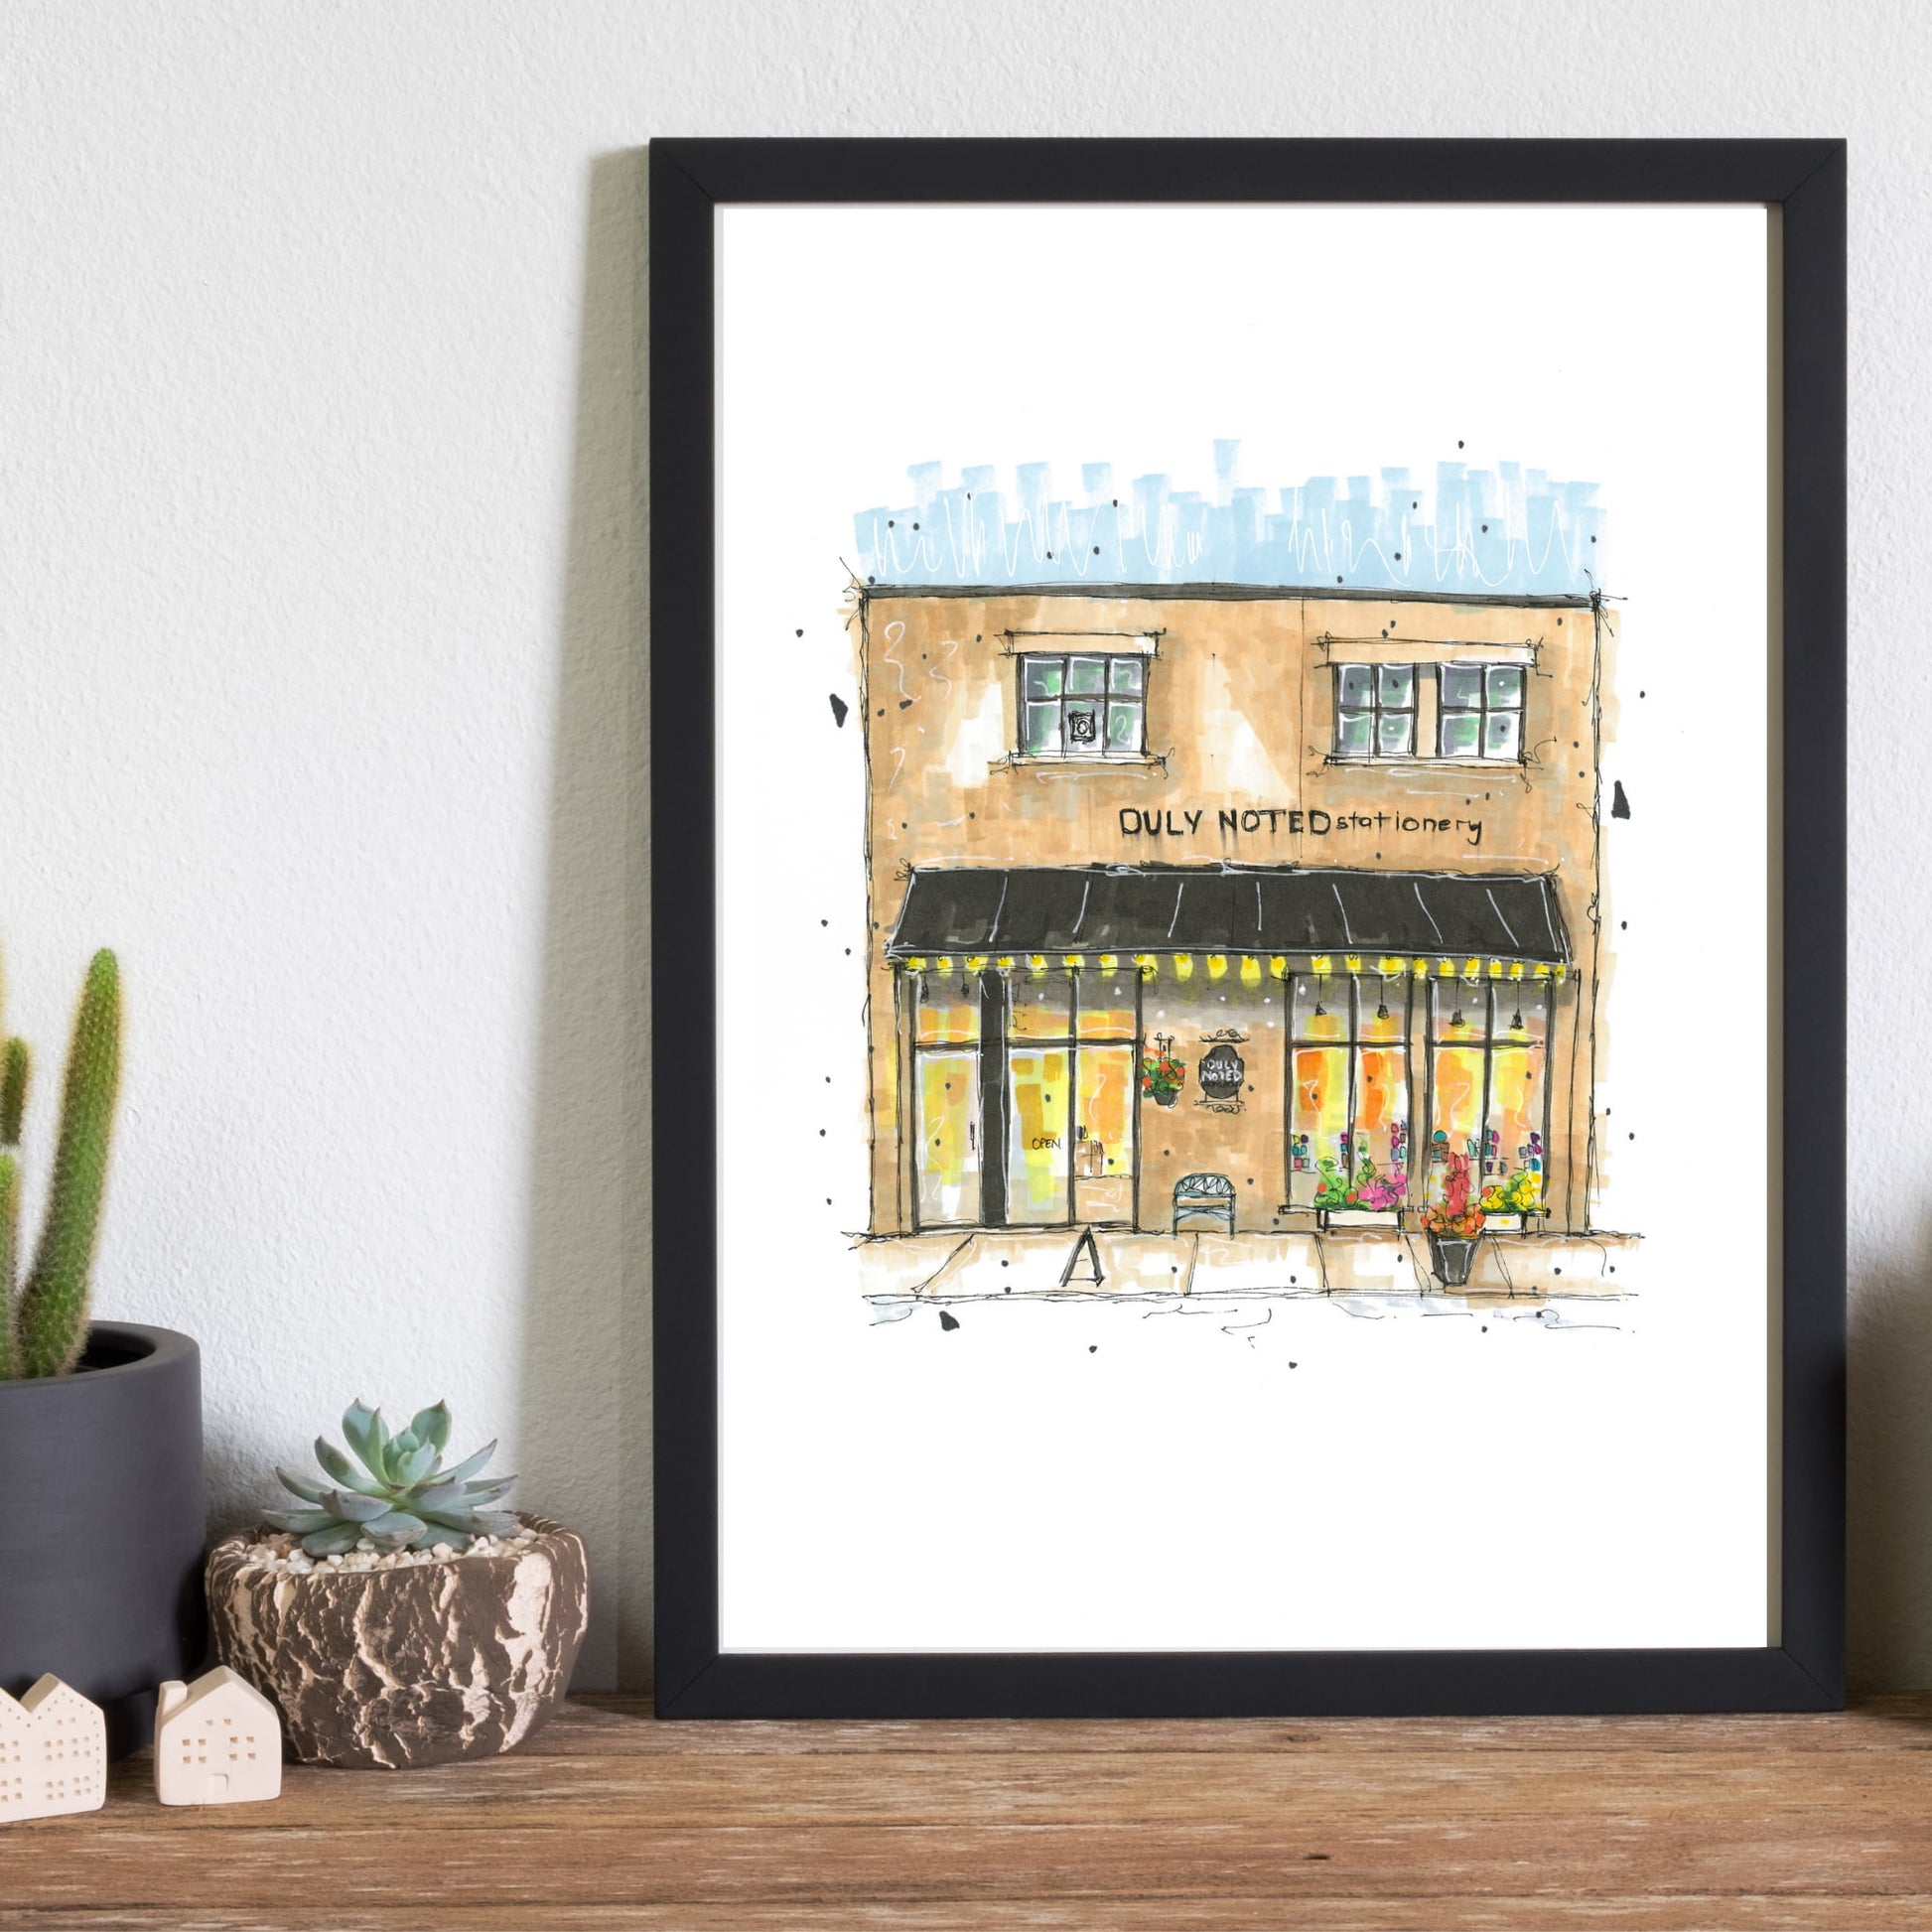 DTS0039 - Duly Noted Stationary, Halifax, Storefront Print, White and Brown, Architectural Sketch, Corner Shop, Art print, Downtown Sketcher, Wynand van Niekerk 